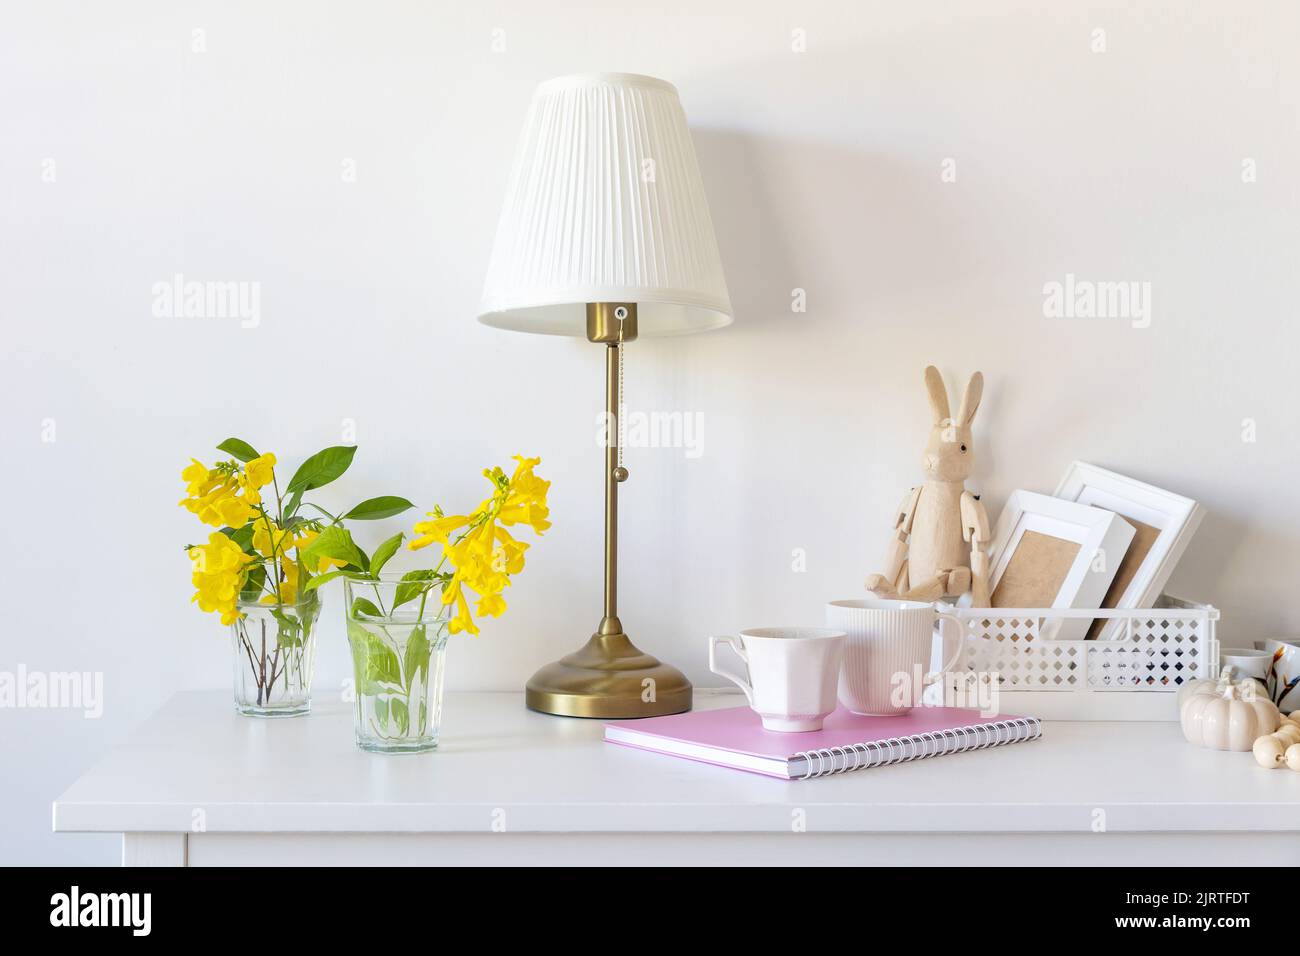 White floor lamp with lampshade. A pink notebook with springs, a white coffee mug, a wooden toy bunny on hinges, sitting on a plastic box. Dresser. Mi Stock Photo